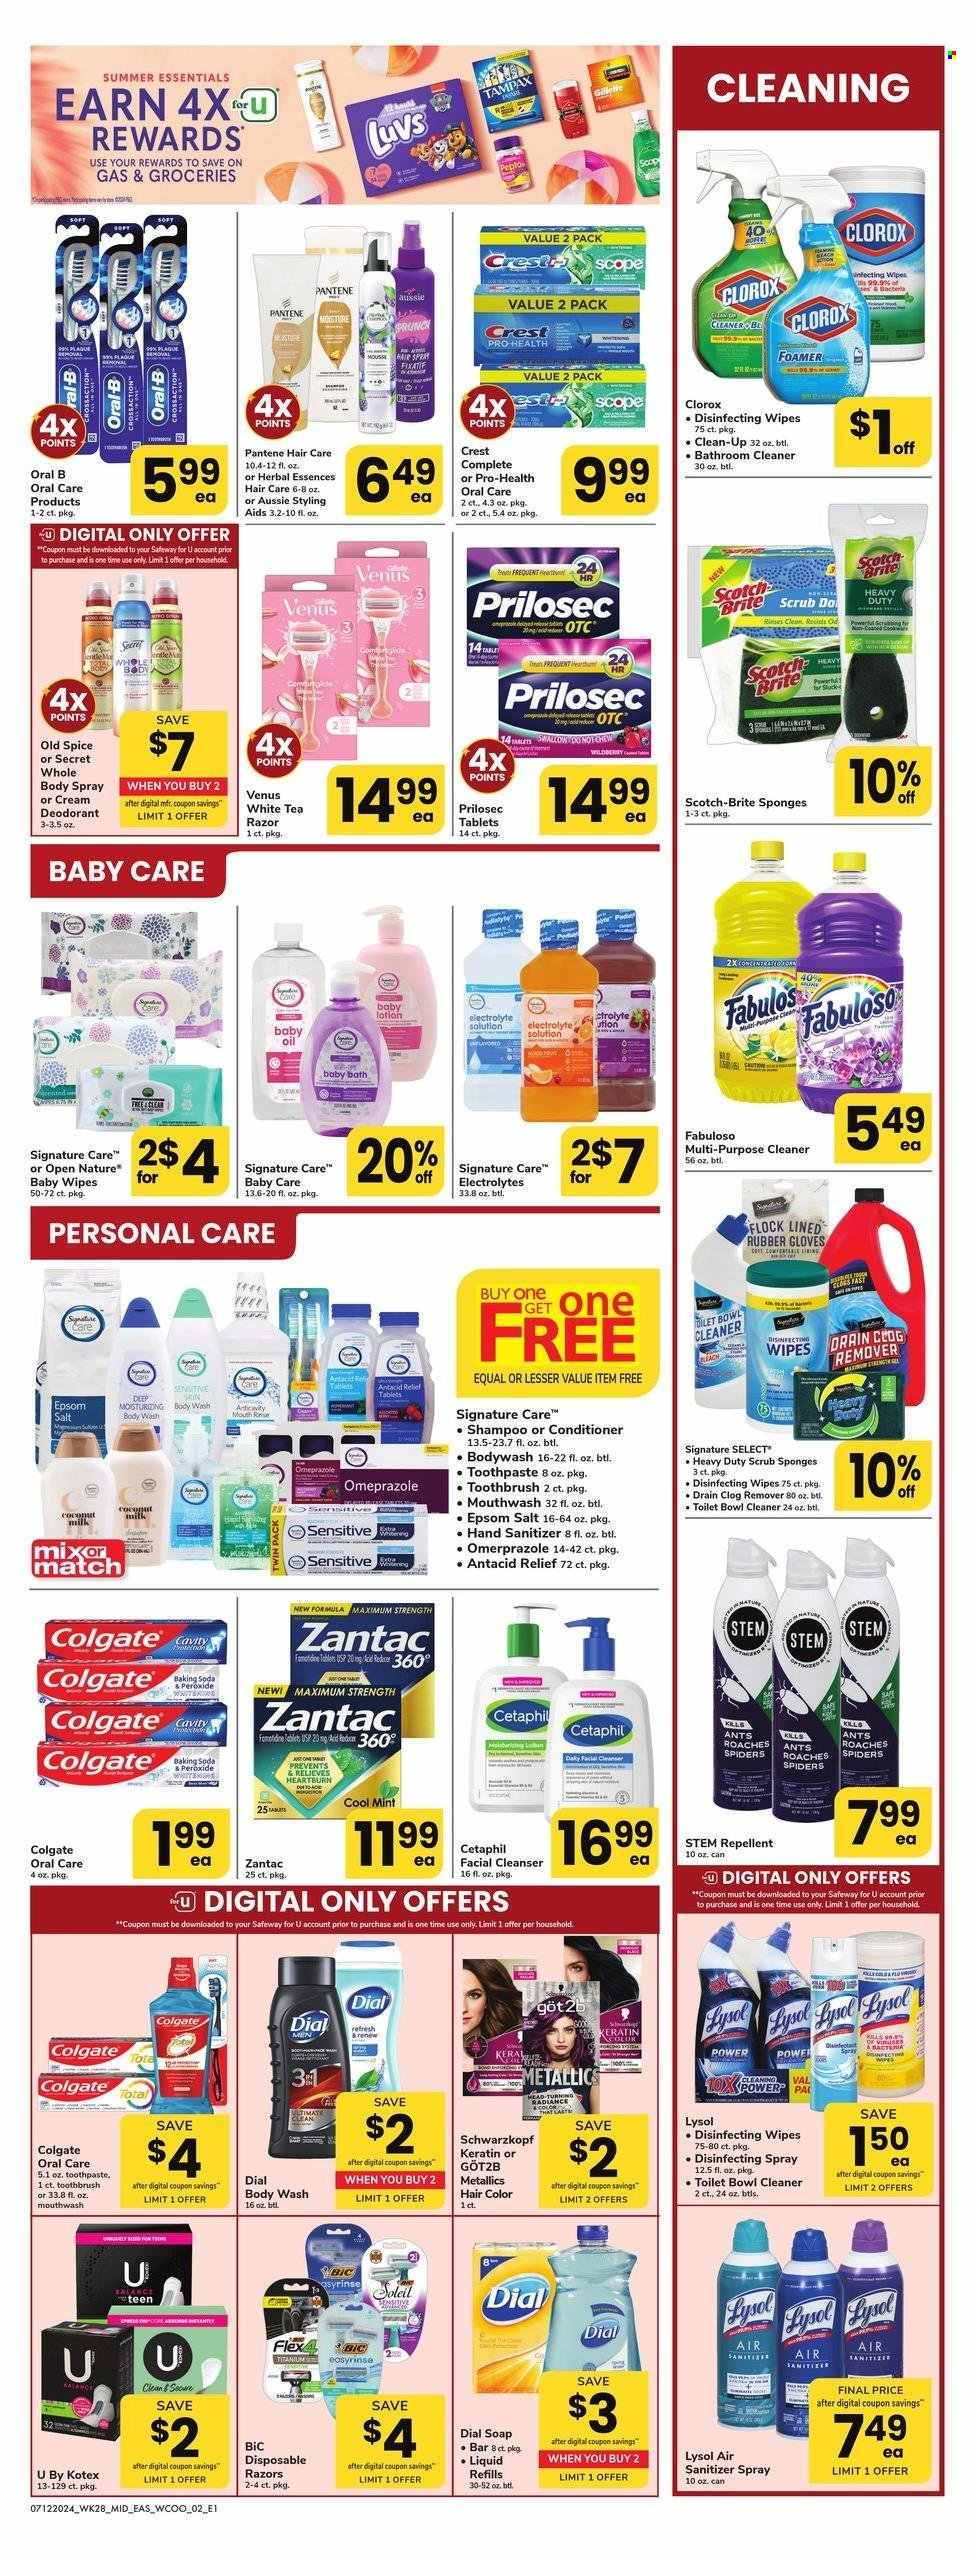 thumbnail - Safeway Flyer - 07/12/2024 - 08/01/2024 - Sales products - plant-based milk, cleansing wipes, wipes, antibacterial spray, all purpose cleaner, toilet cleaner, Lysol, Clorox, Fabuloso, bathroom cleaner, body wash, shampoo, Old Spice, Schwarzkopf, Dial, soap, hair products, Colgate, toothbrush, Oral-B, toothpaste, mouthwash, Crest, Tampax, Kotex, cleanser, sponge, Cetaphil, skin care product, Aussie, conditioner, Pantene, hair color, Herbal Essences, hair styling product, body lotion, body spray, BIC, Gillette, Venus, disposable razor, gloves, air freshener, Zantac, Antacid, epsom salt, hand sanitizer. Page 2.